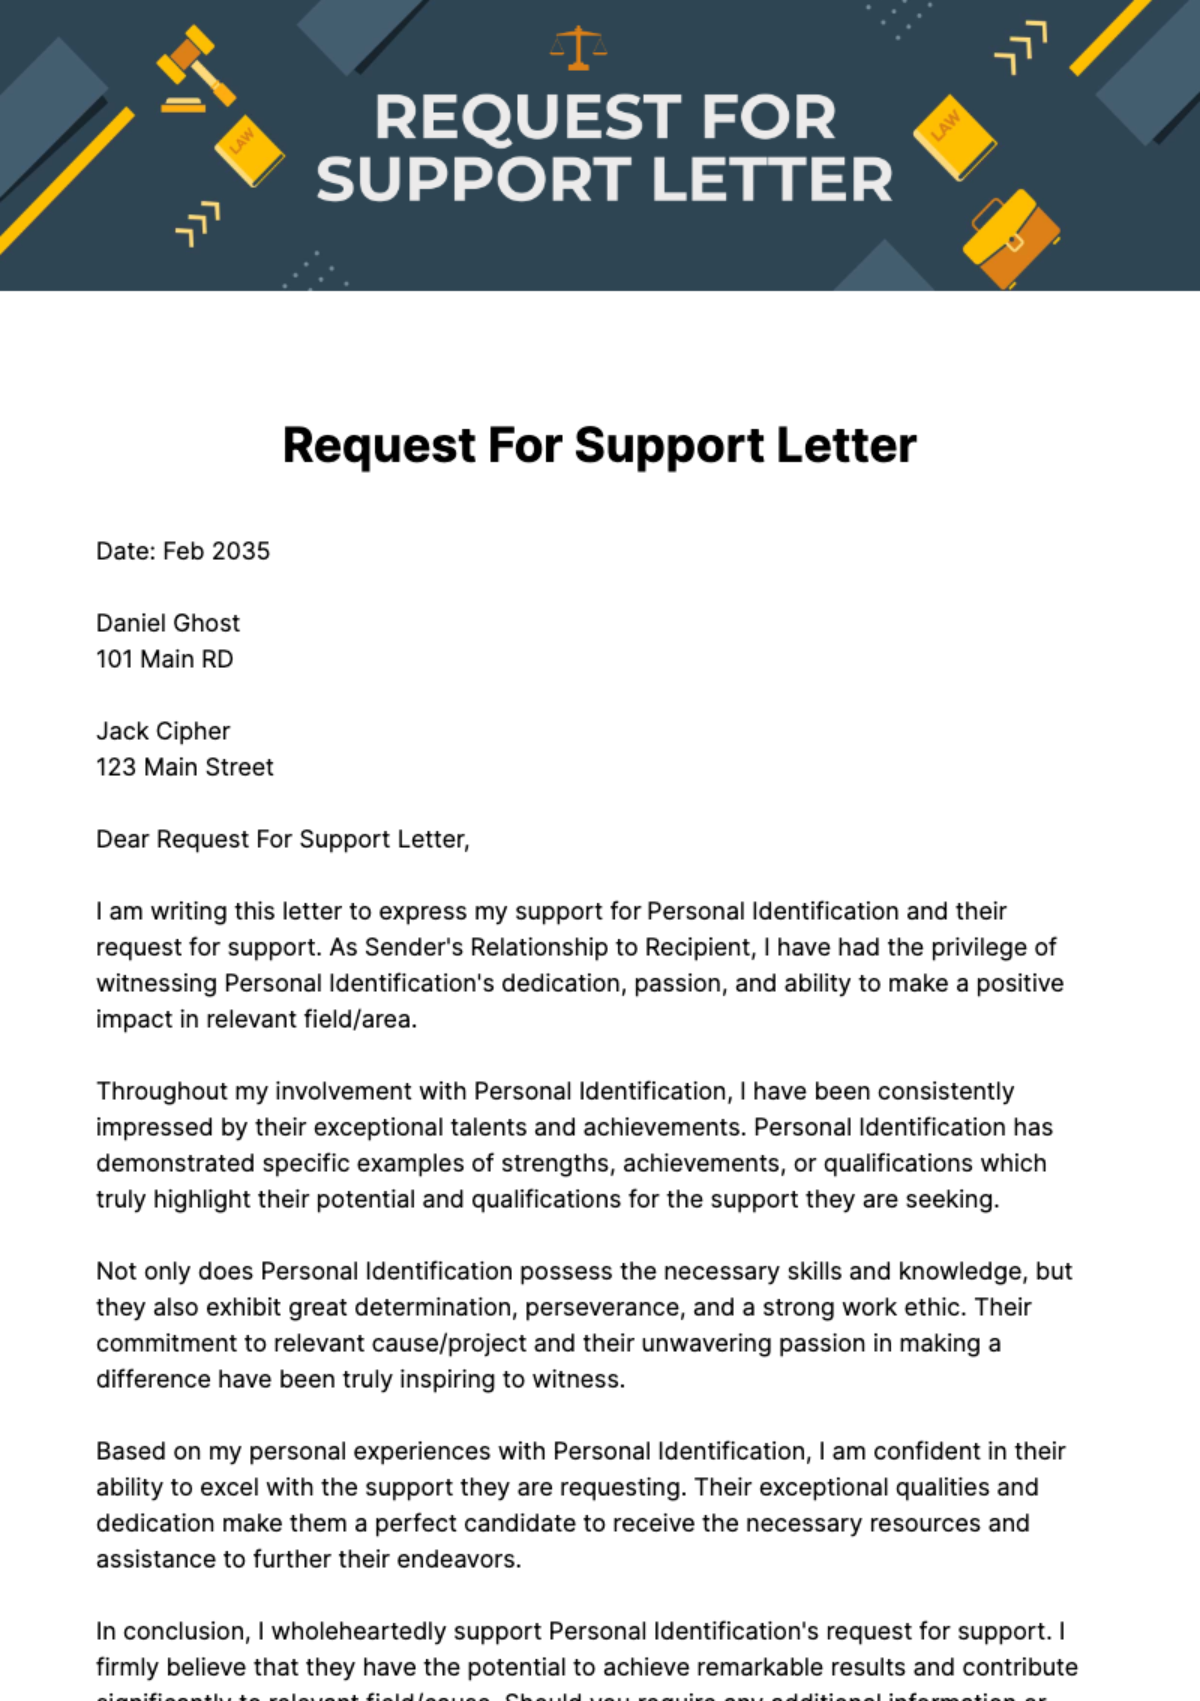 Request For Support Letter Template